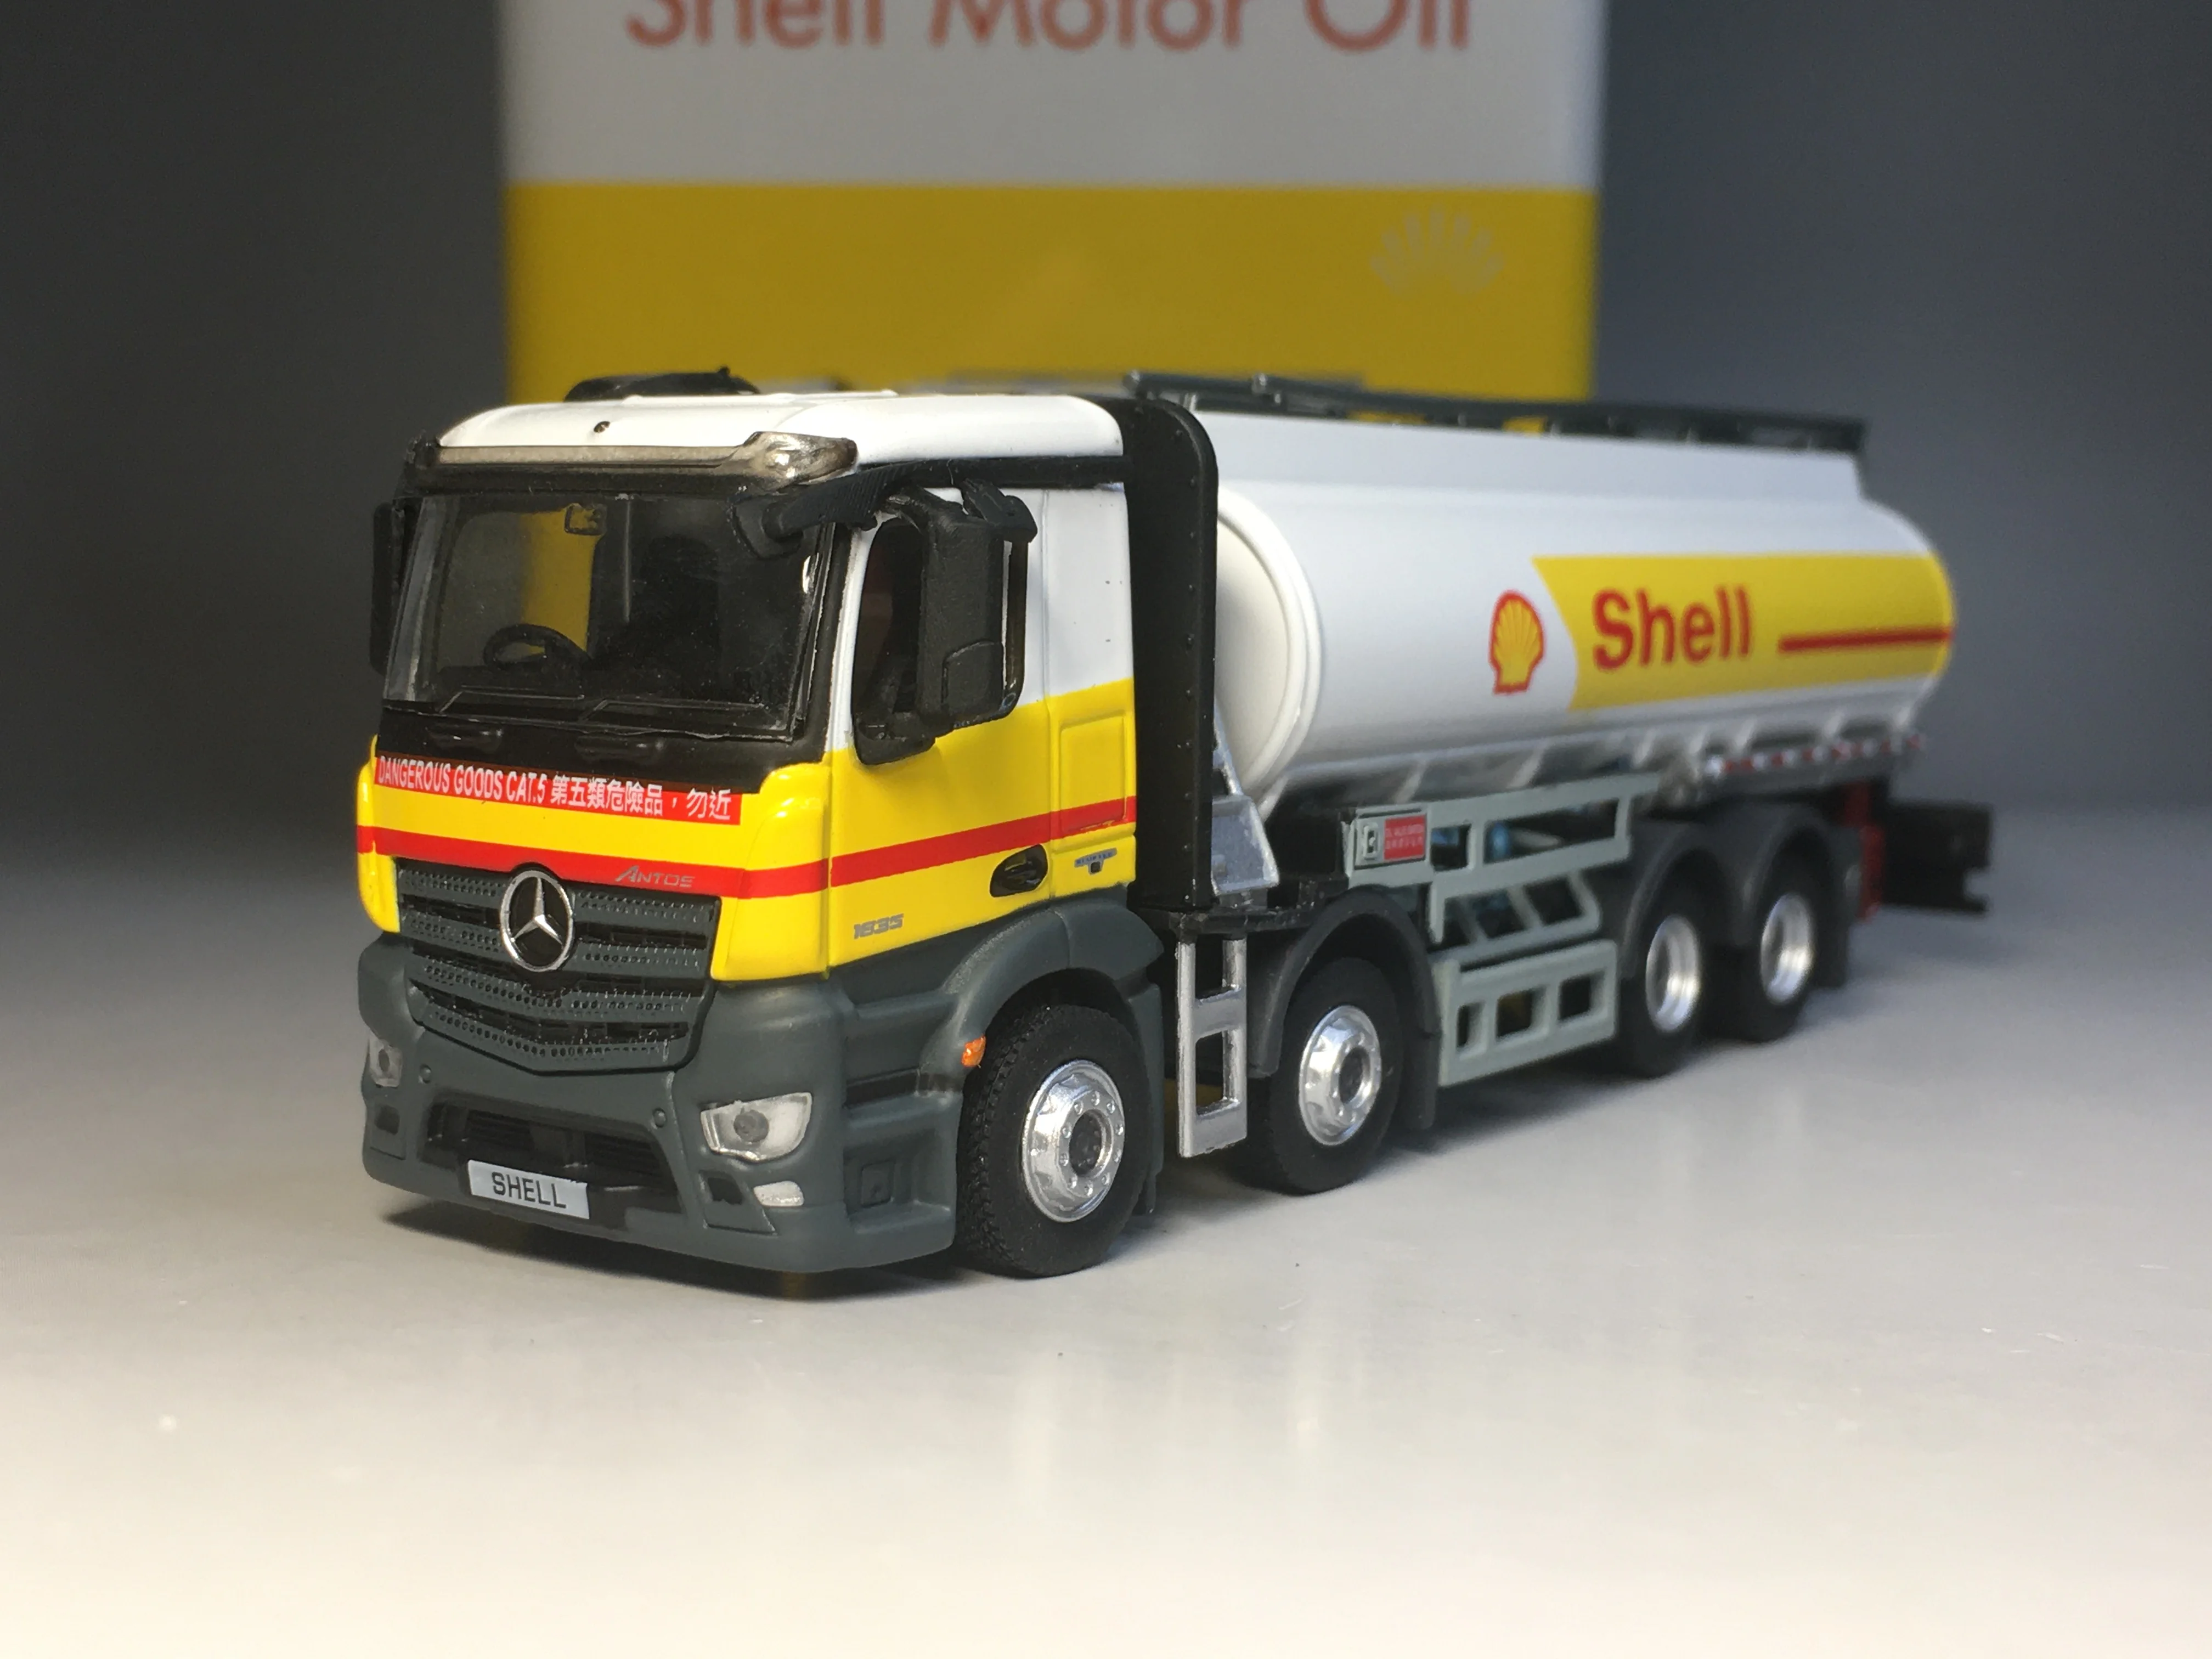 

Tiny 1/76 Shell Oil Tanker Truck-MERCEDES-BENZ Antos- Die Cast Model Car Collection Limited